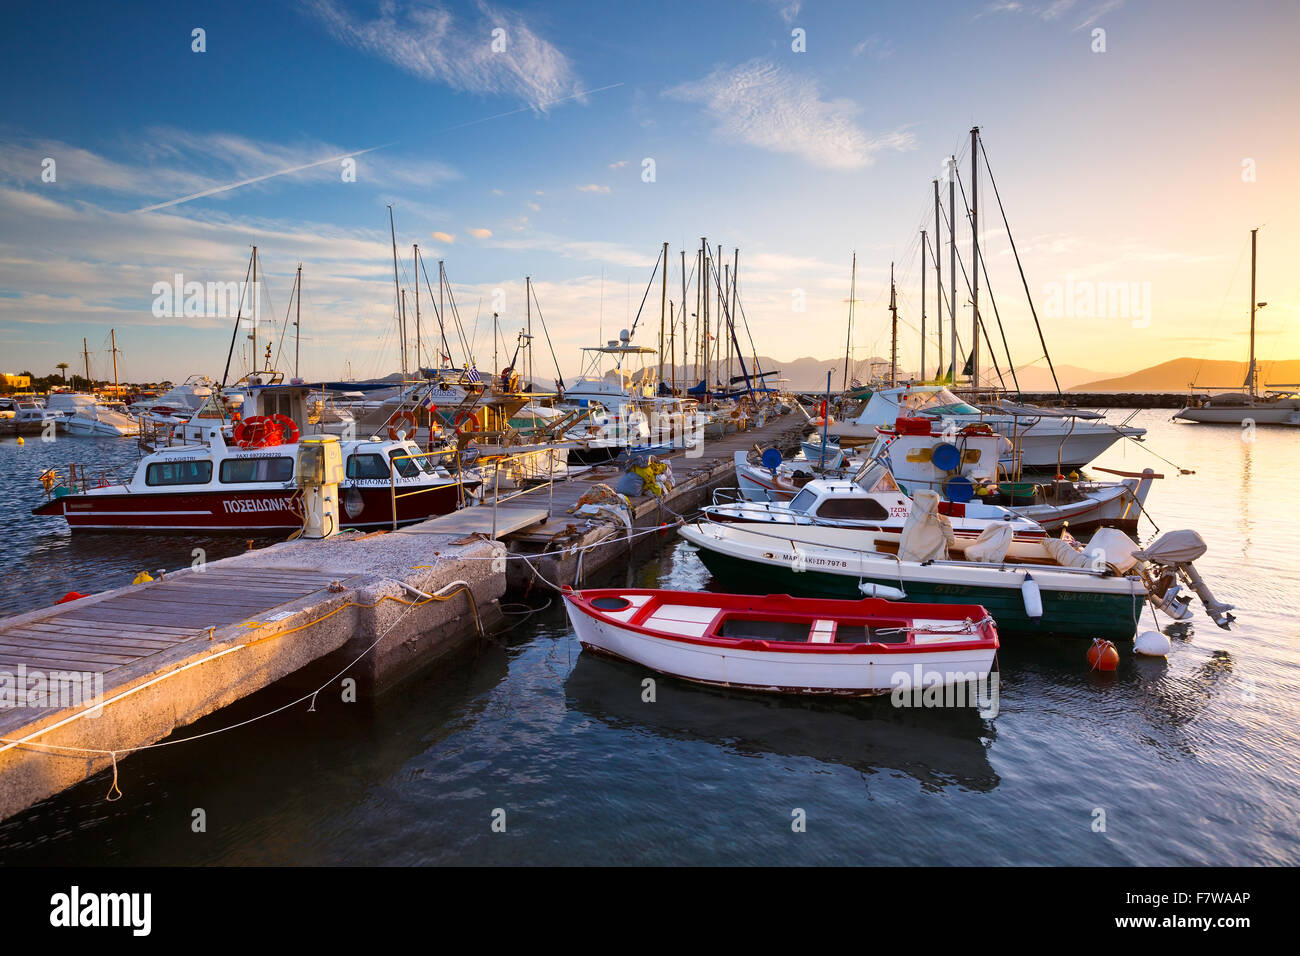 Fishing boats and sail boats in the port of Aegina, Greece Stock Photo